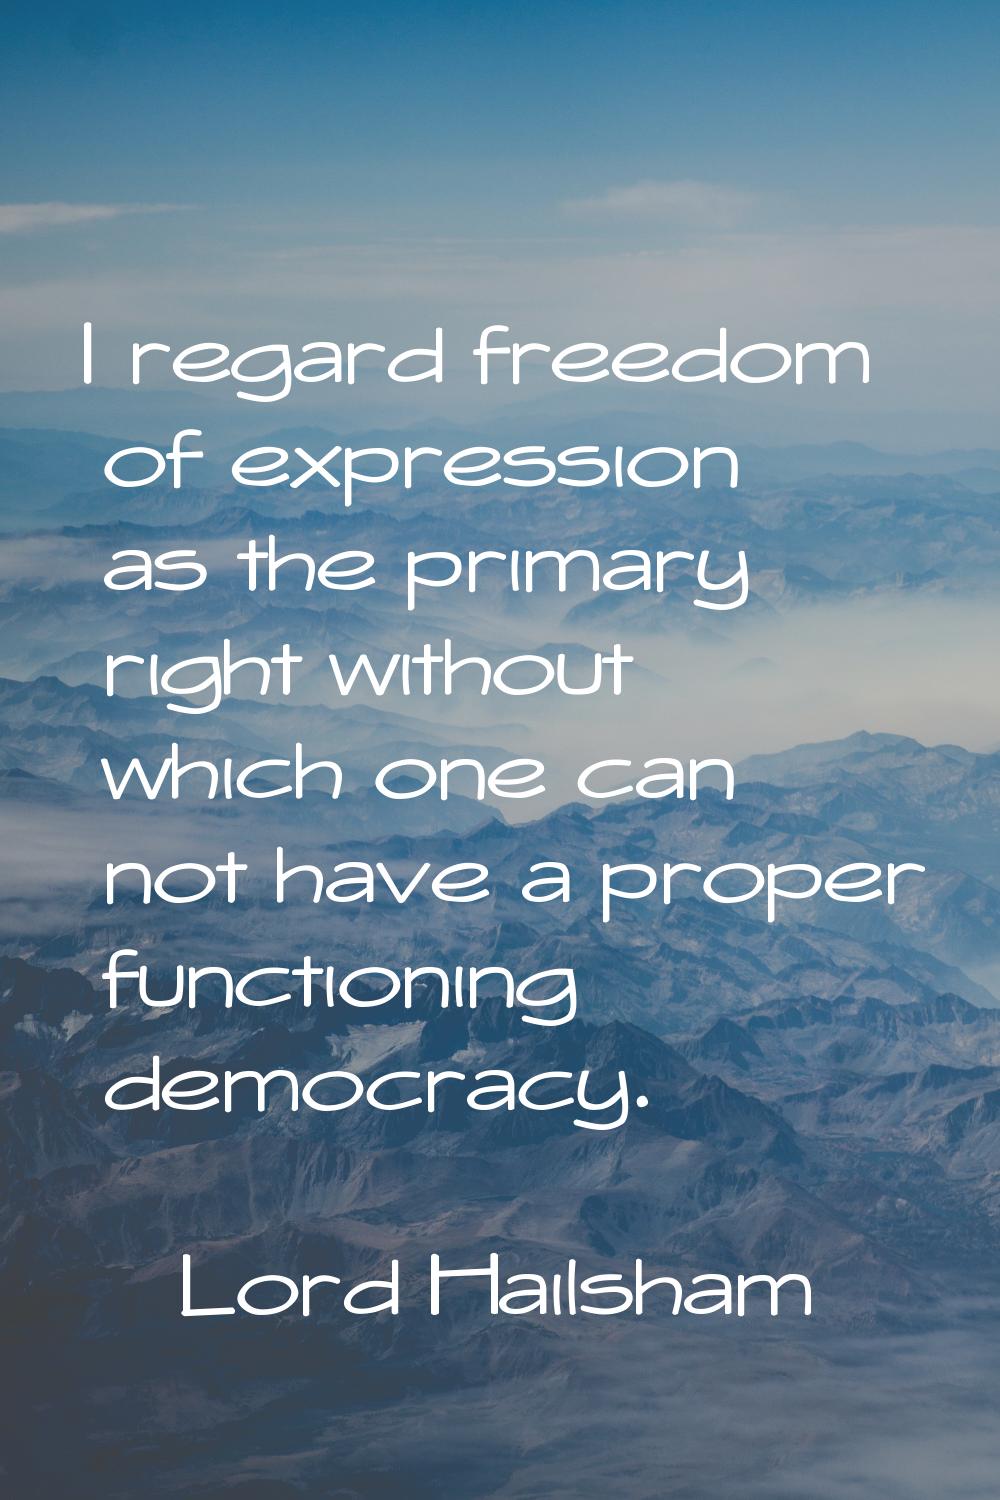 I regard freedom of expression as the primary right without which one can not have a proper functio